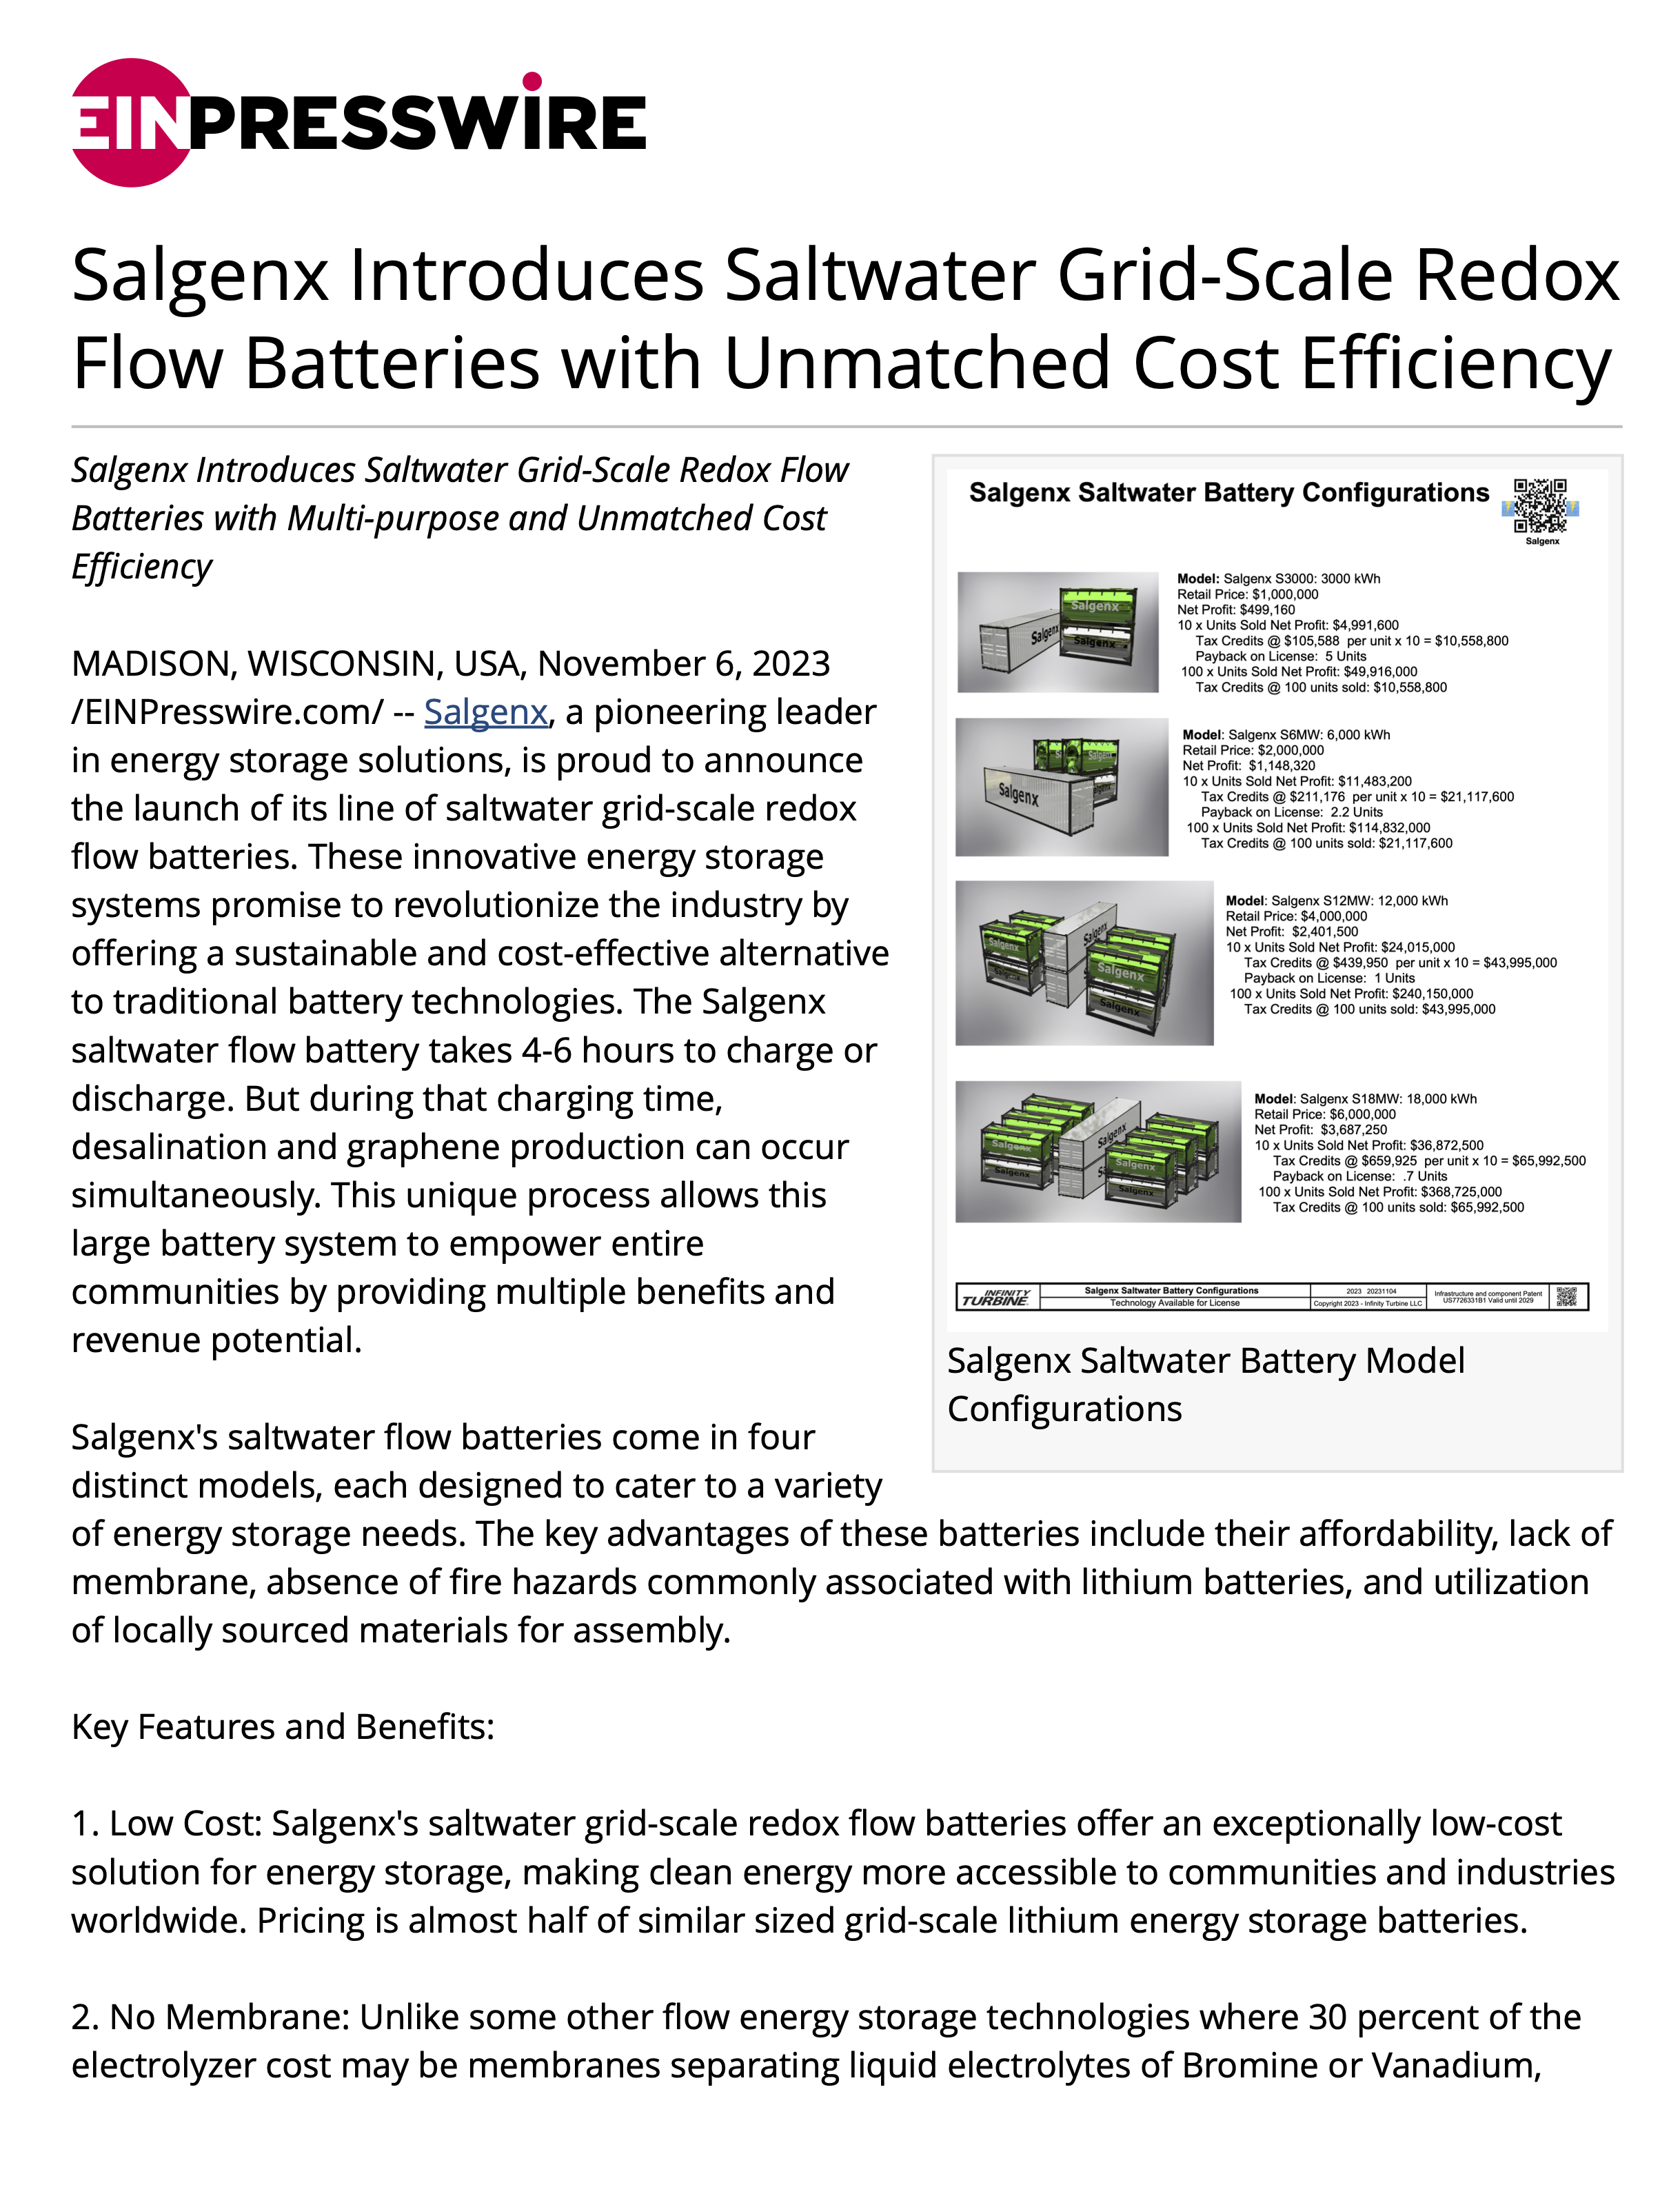 Salgenx Introduces Saltwater Grid-Scale Redox Flow Batteries with Unmatched Cost Efficiency